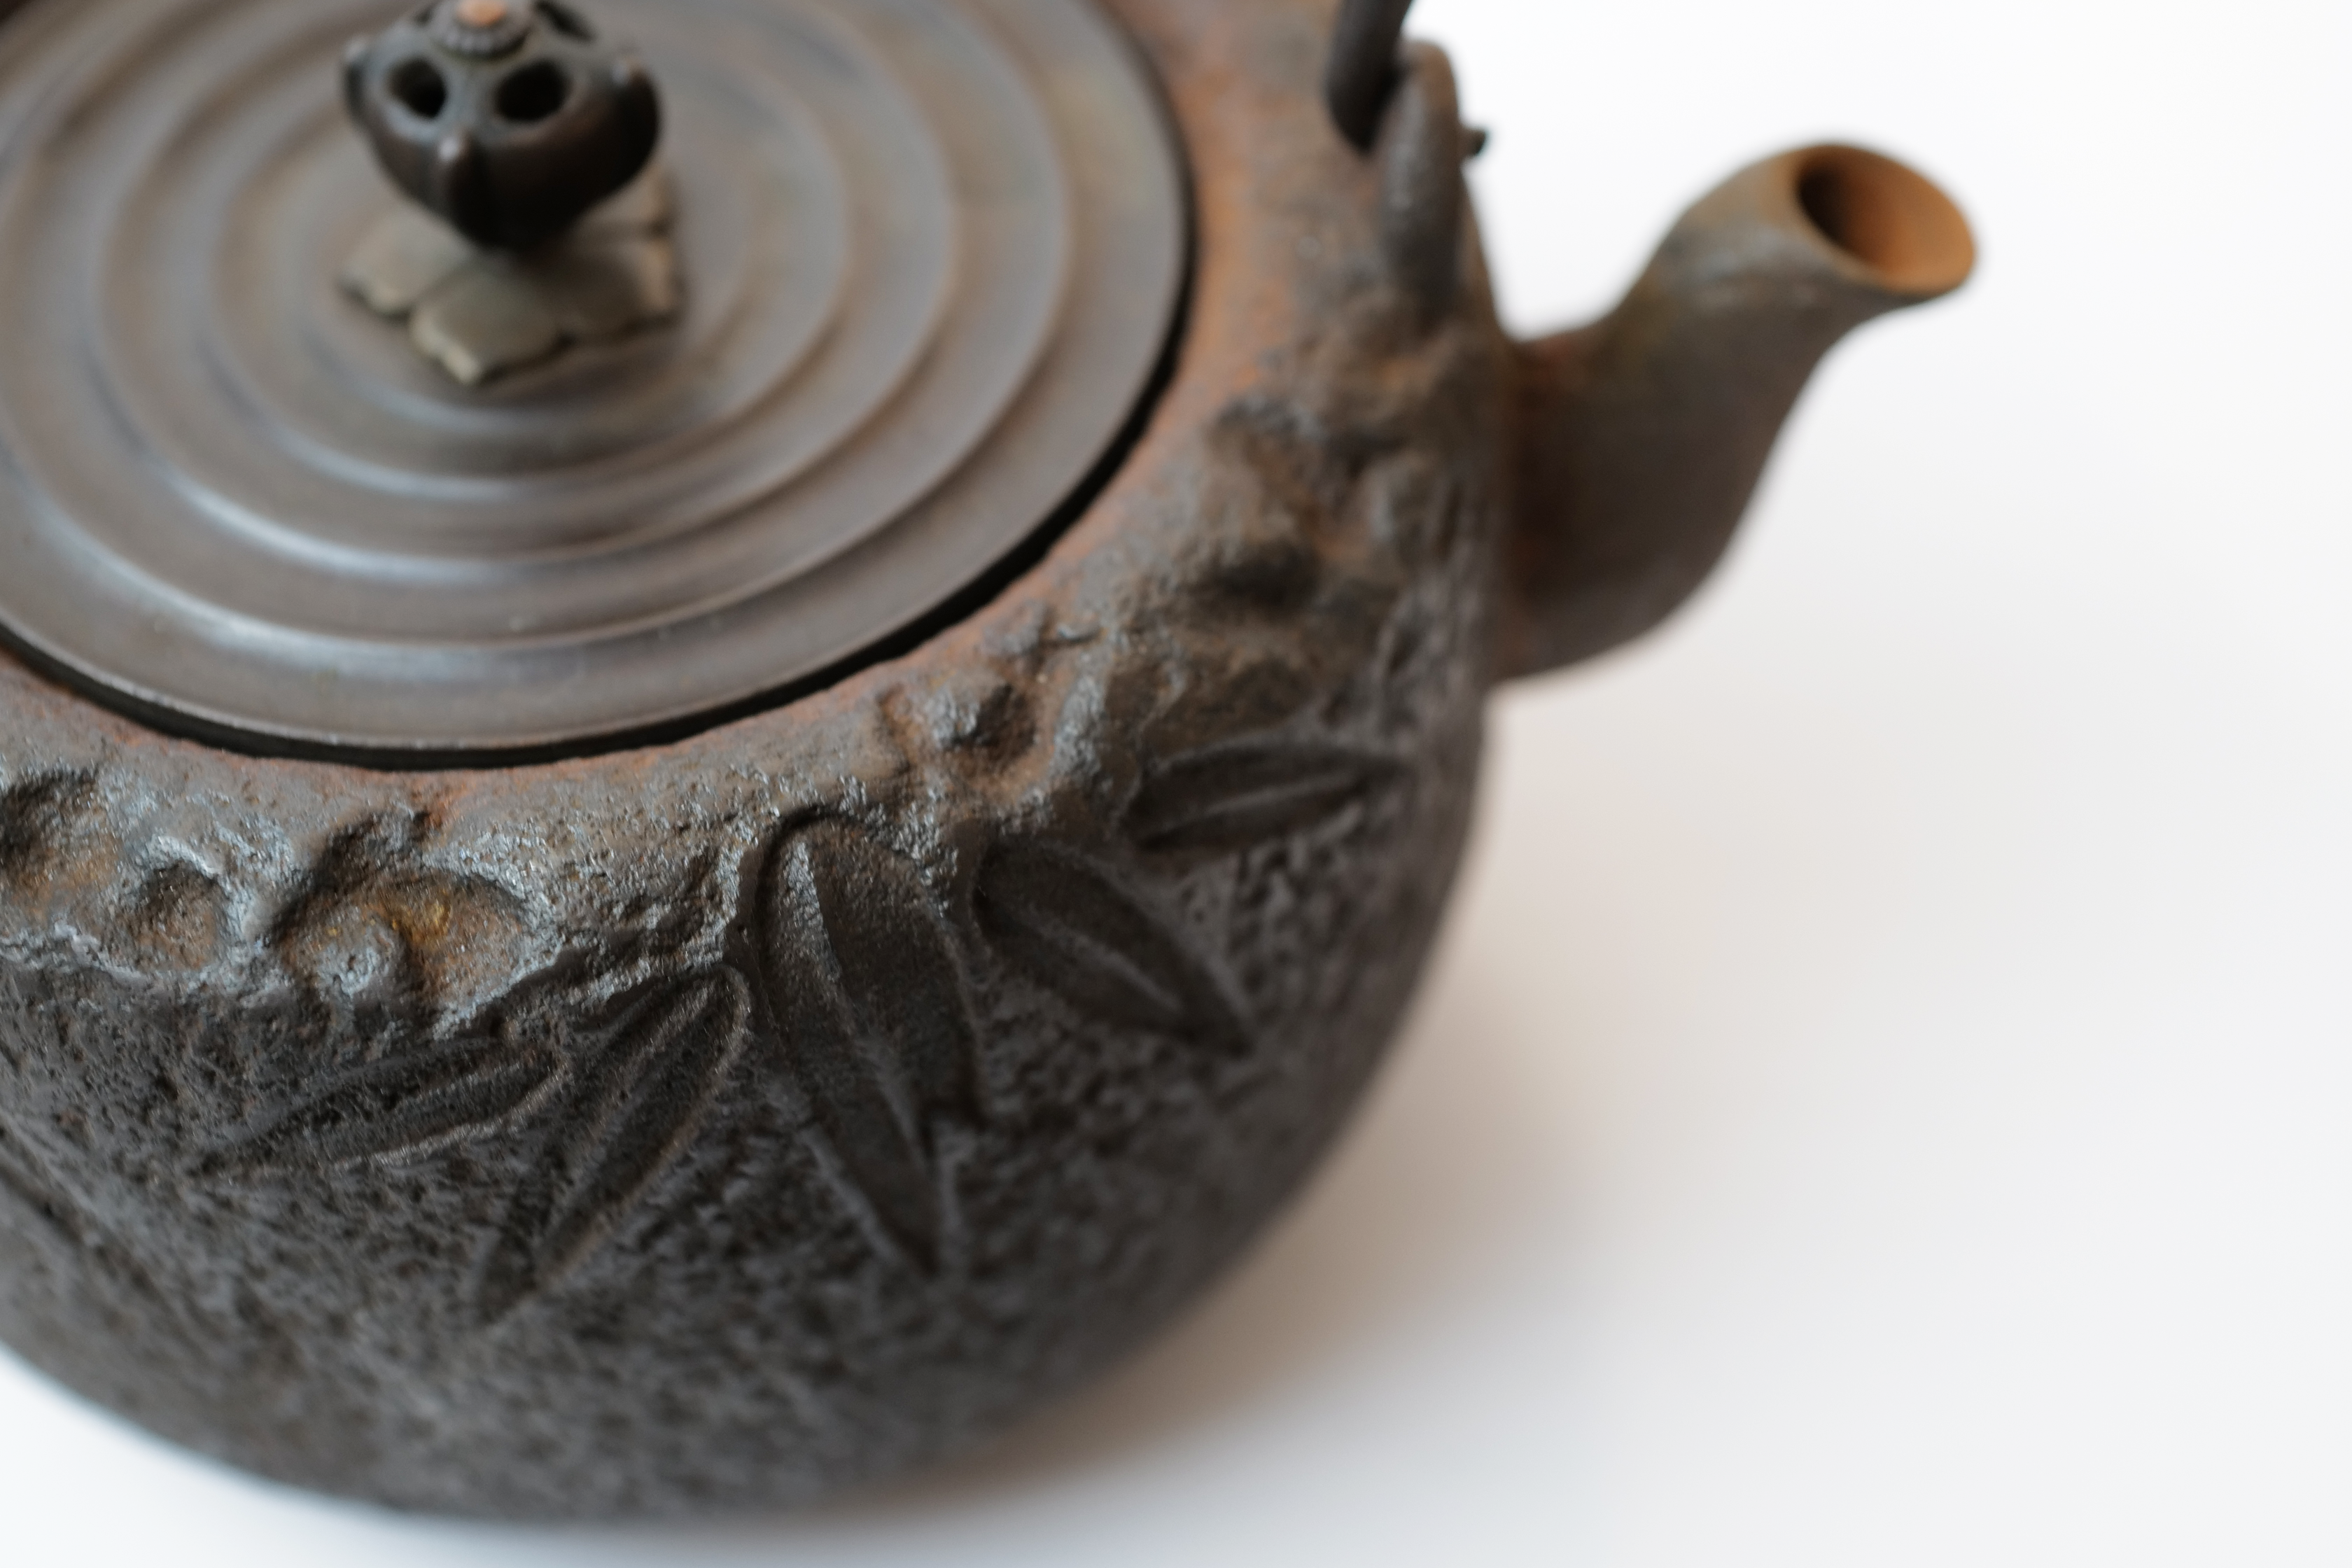 Iron Tea Kettle with Patterns of Bamboo Leaves【竹叶纹铁壶 